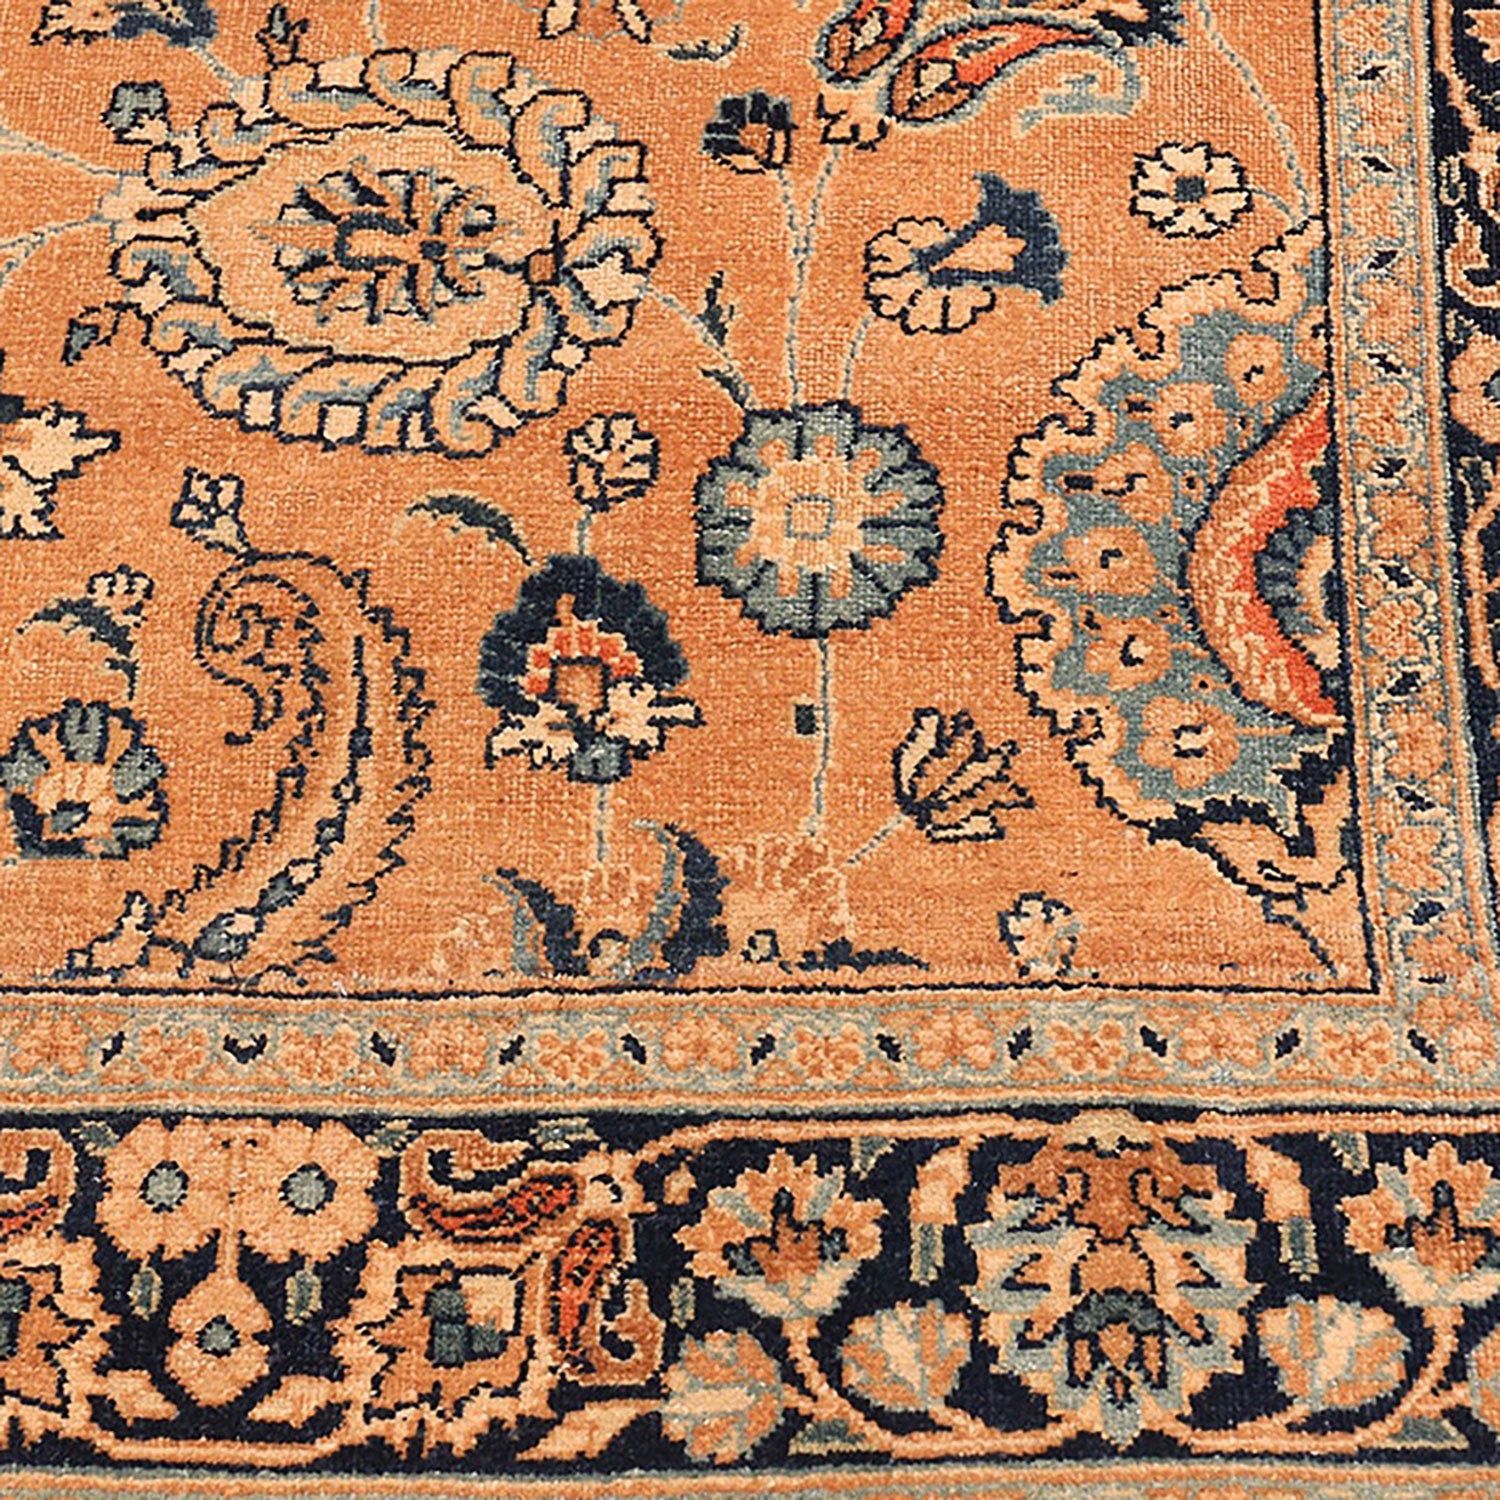 Intricate Middle Eastern or South Asian rug with warm color palette